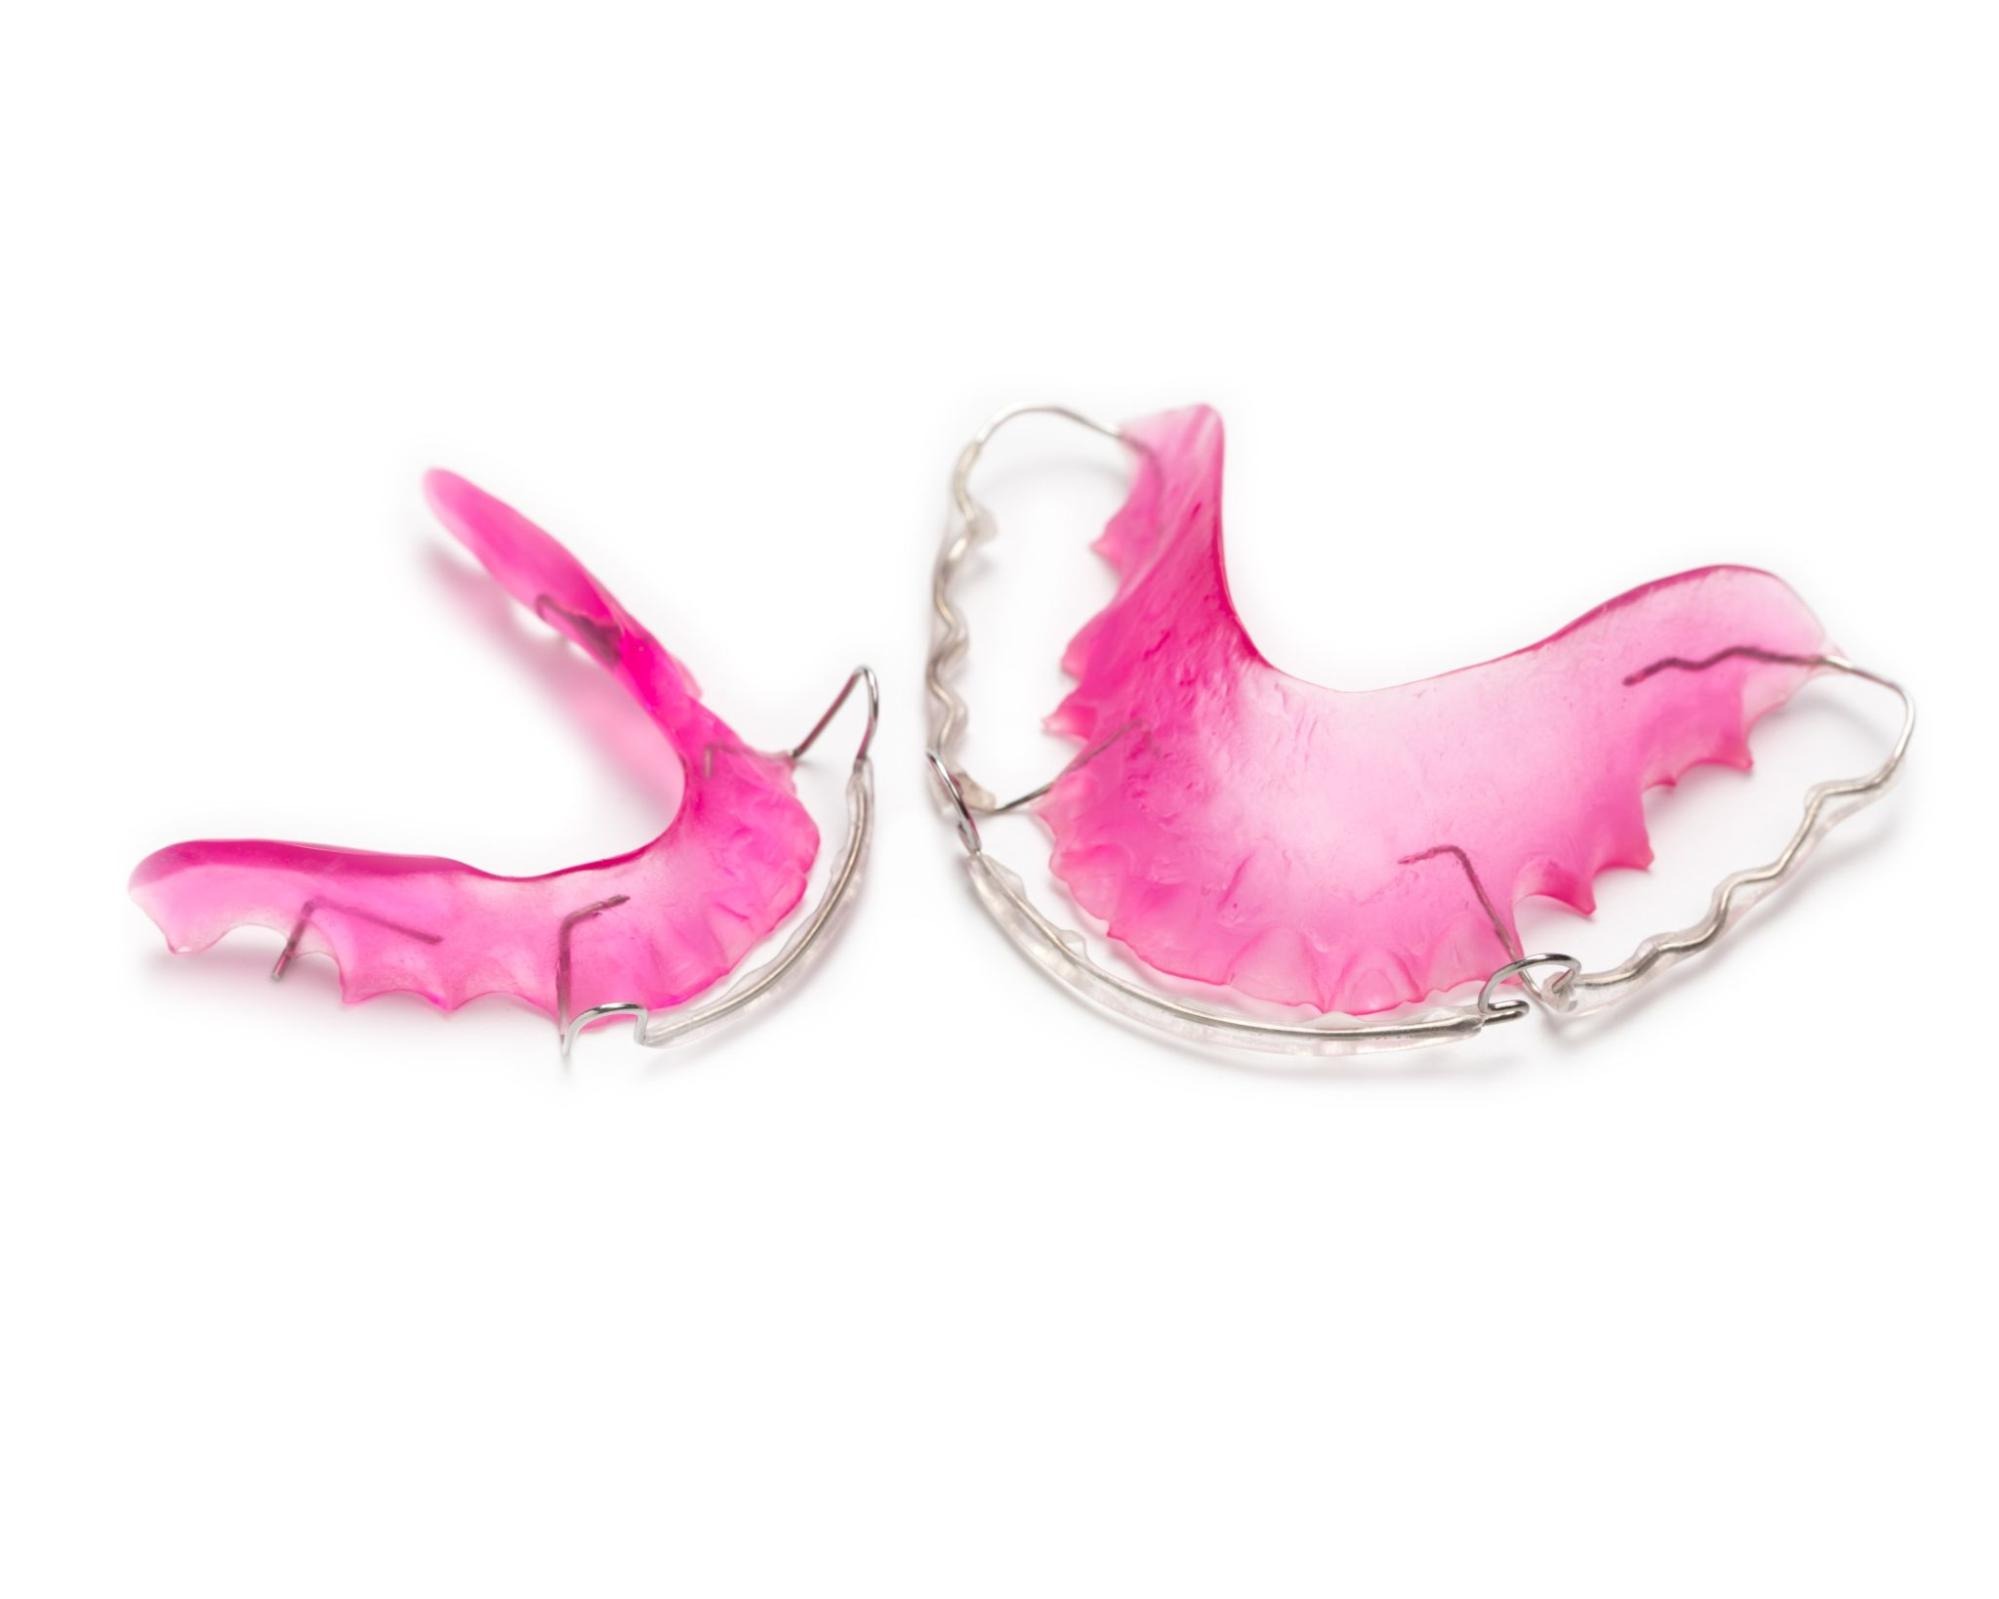 Retainer Whitewater Orthodontic Studios in Yelm and Tacoma, WA